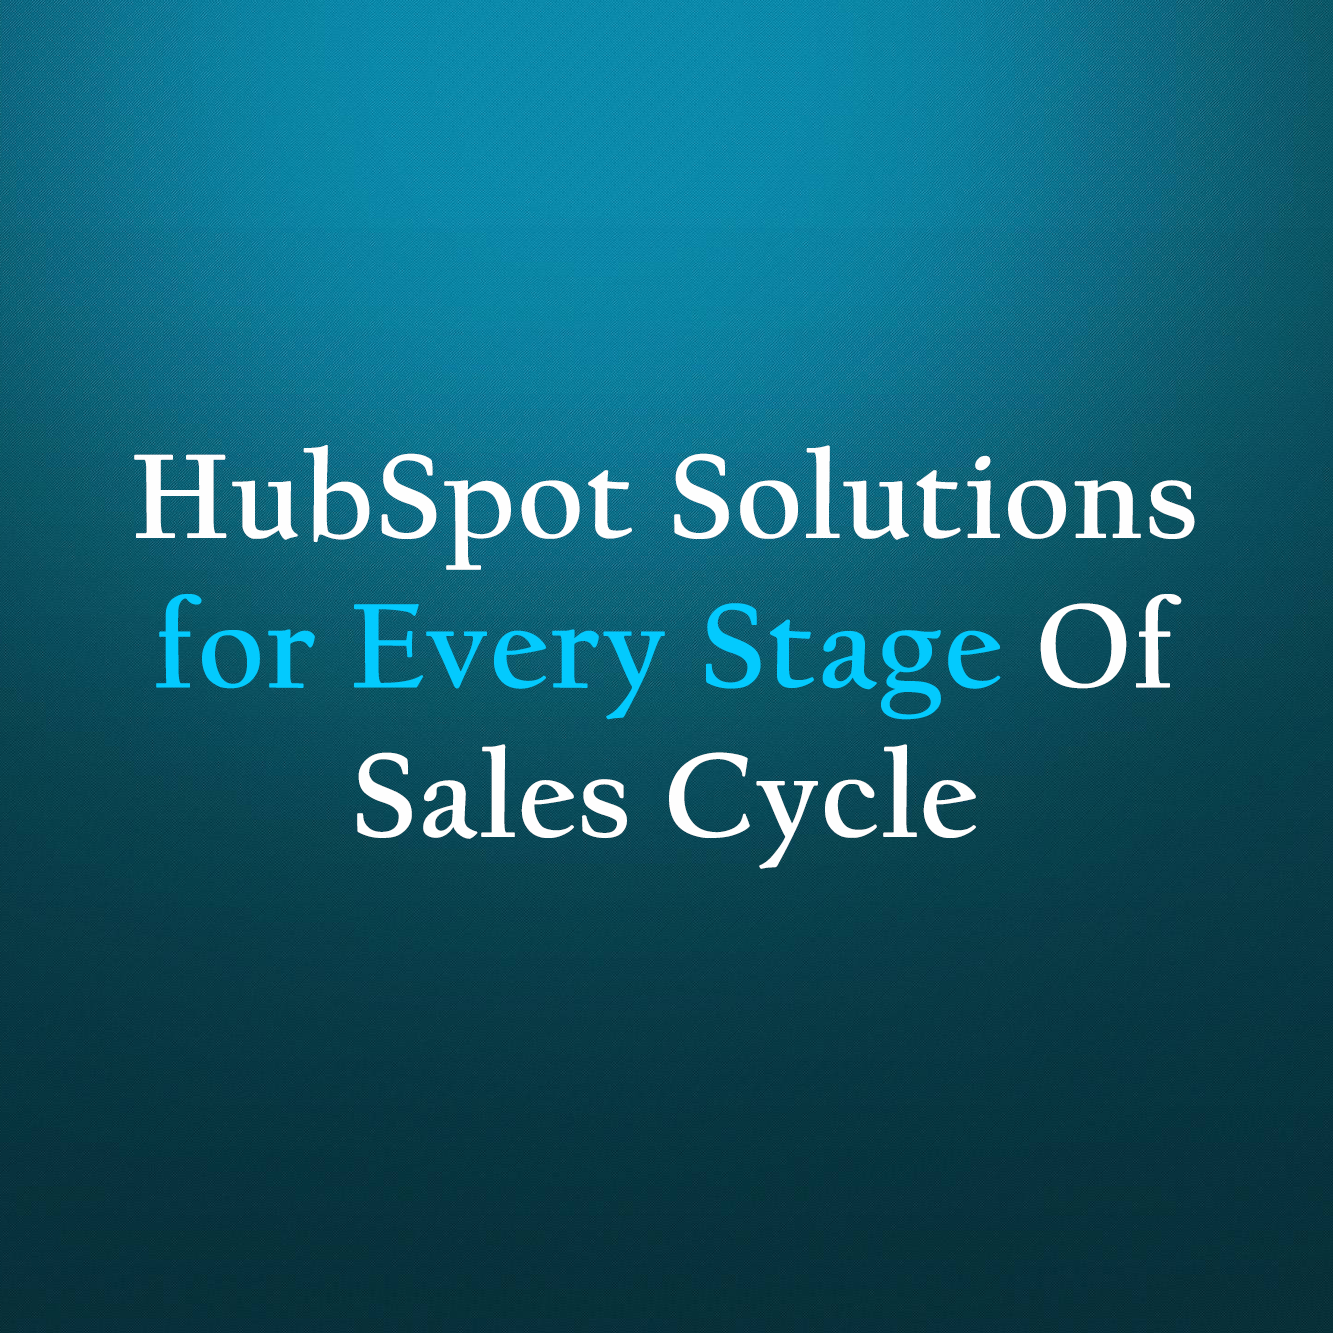 HubSpot Solutions for Every Stage of Sales Cycle